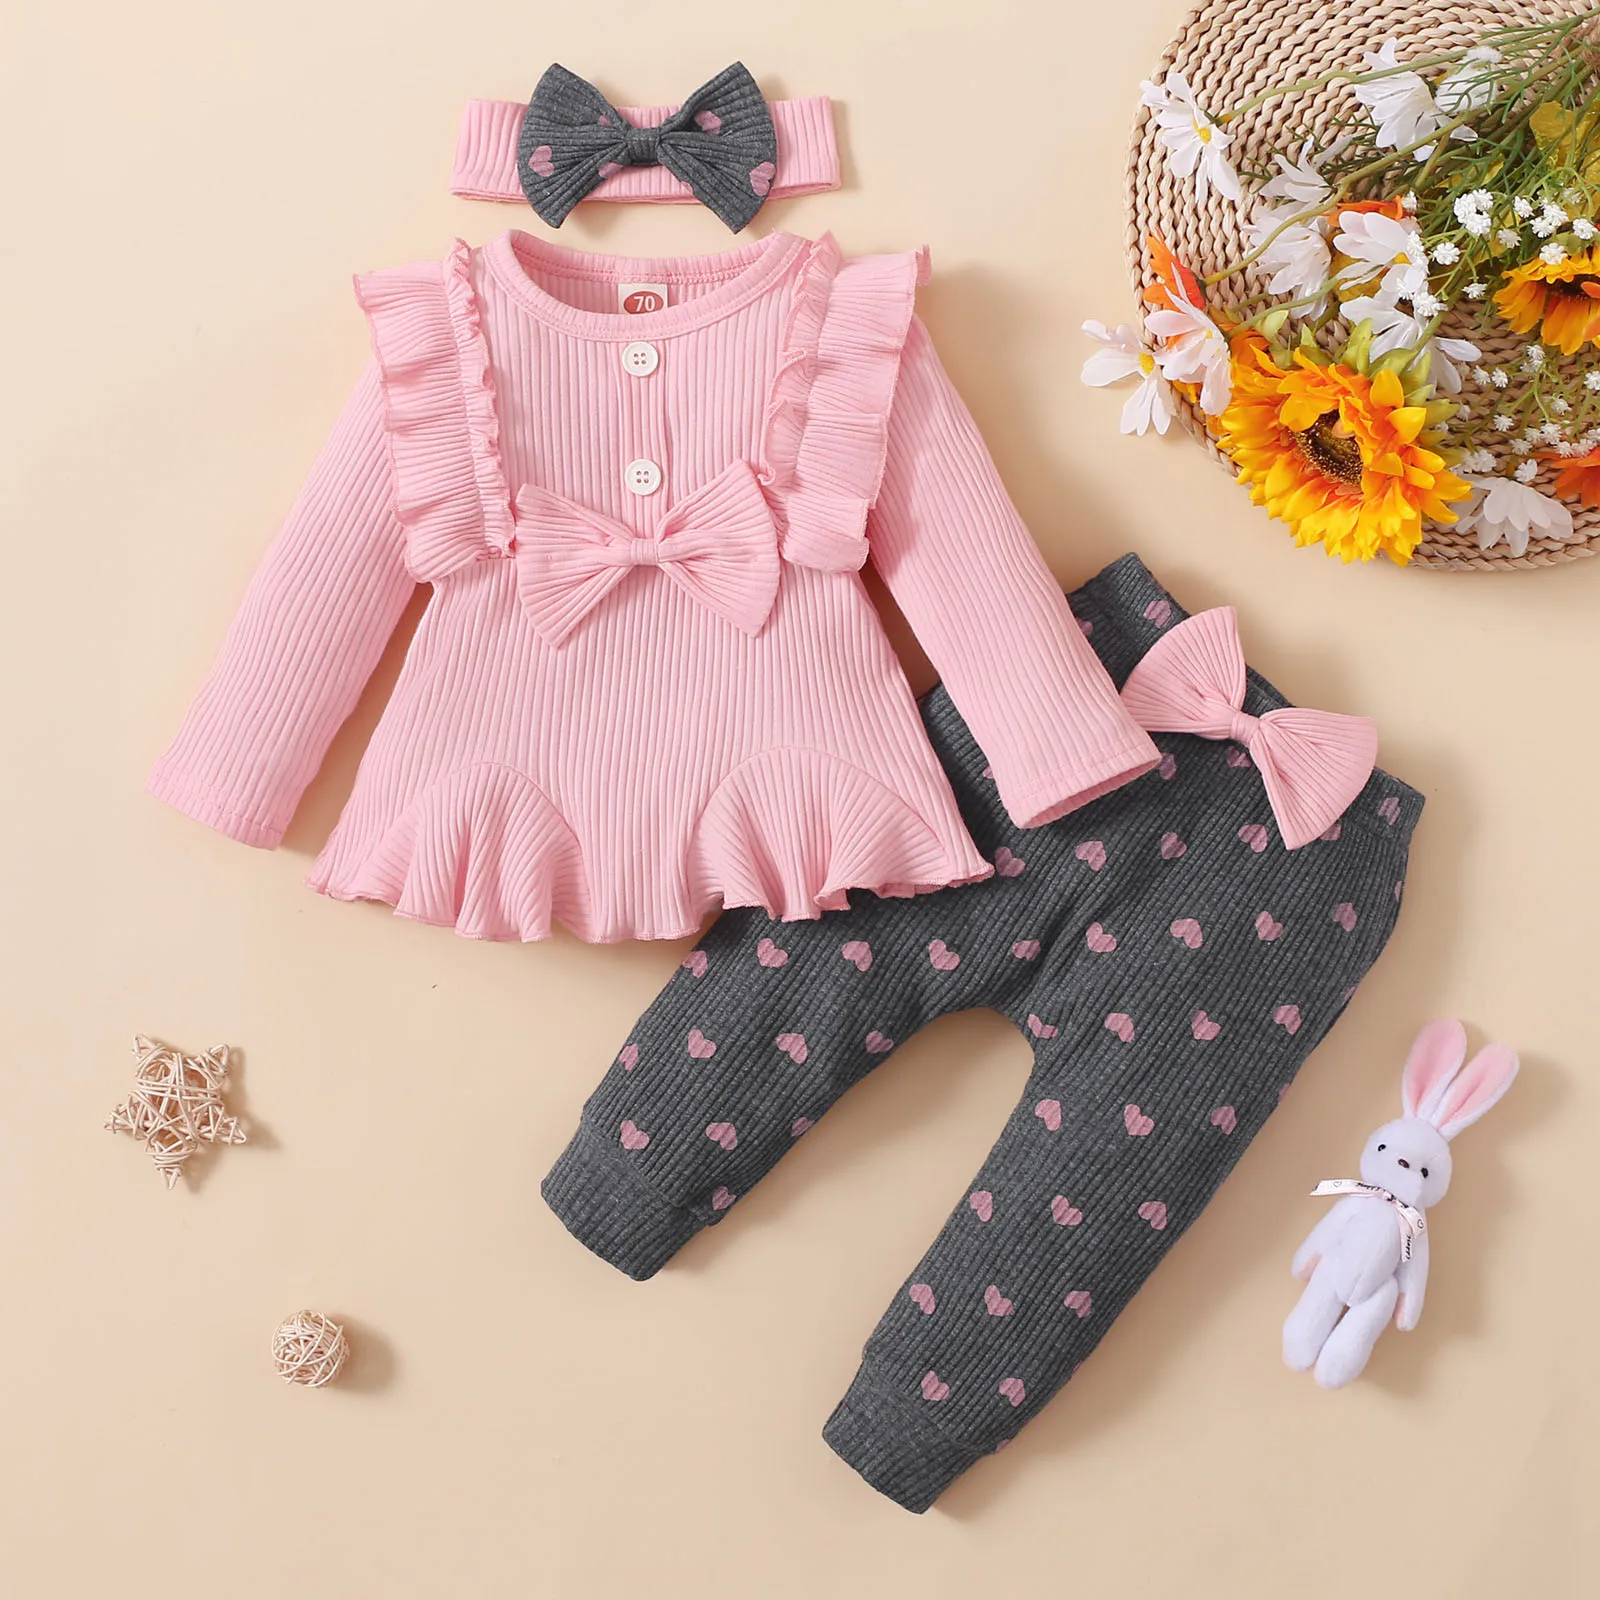 Spring Summer Toddler Baby Girls Casual Clothes Set Solid Lovely Infant Outfits Long Sleeve Tops Bow Pants Girls Clothing Set baby girl cotton clothing set